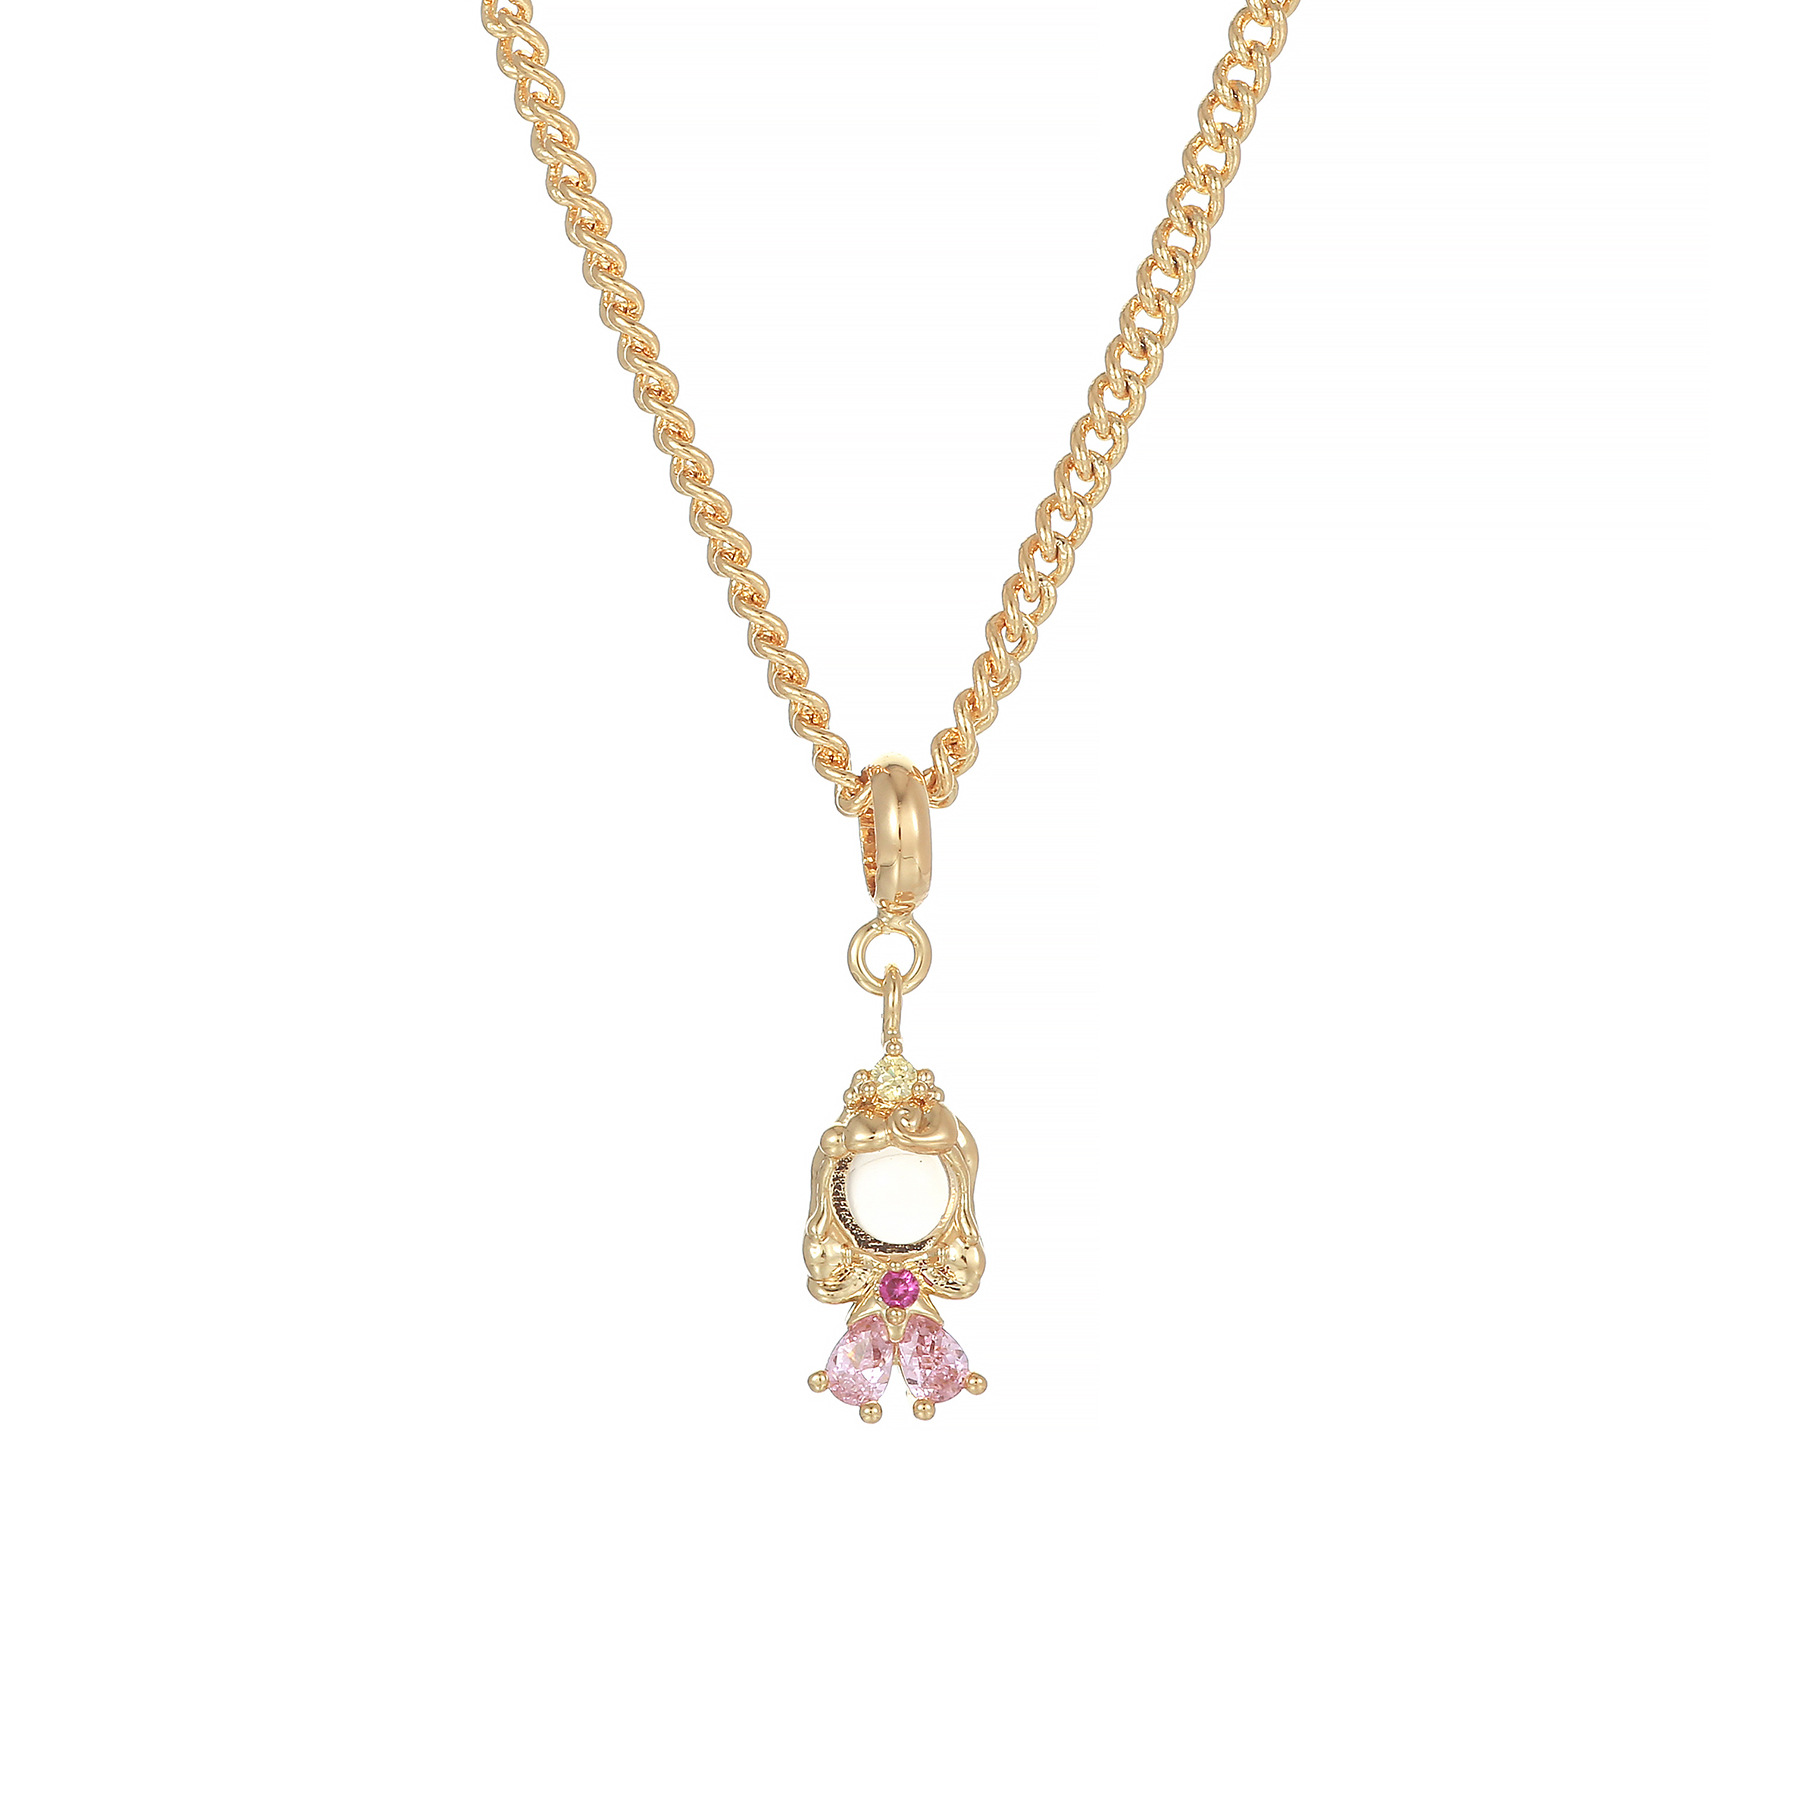 New European and American Color Zircon Cartoon Princess Necklace Fashion Mermaid Pendant Real Gold Color Preservation Clavicle Chain Wholesale